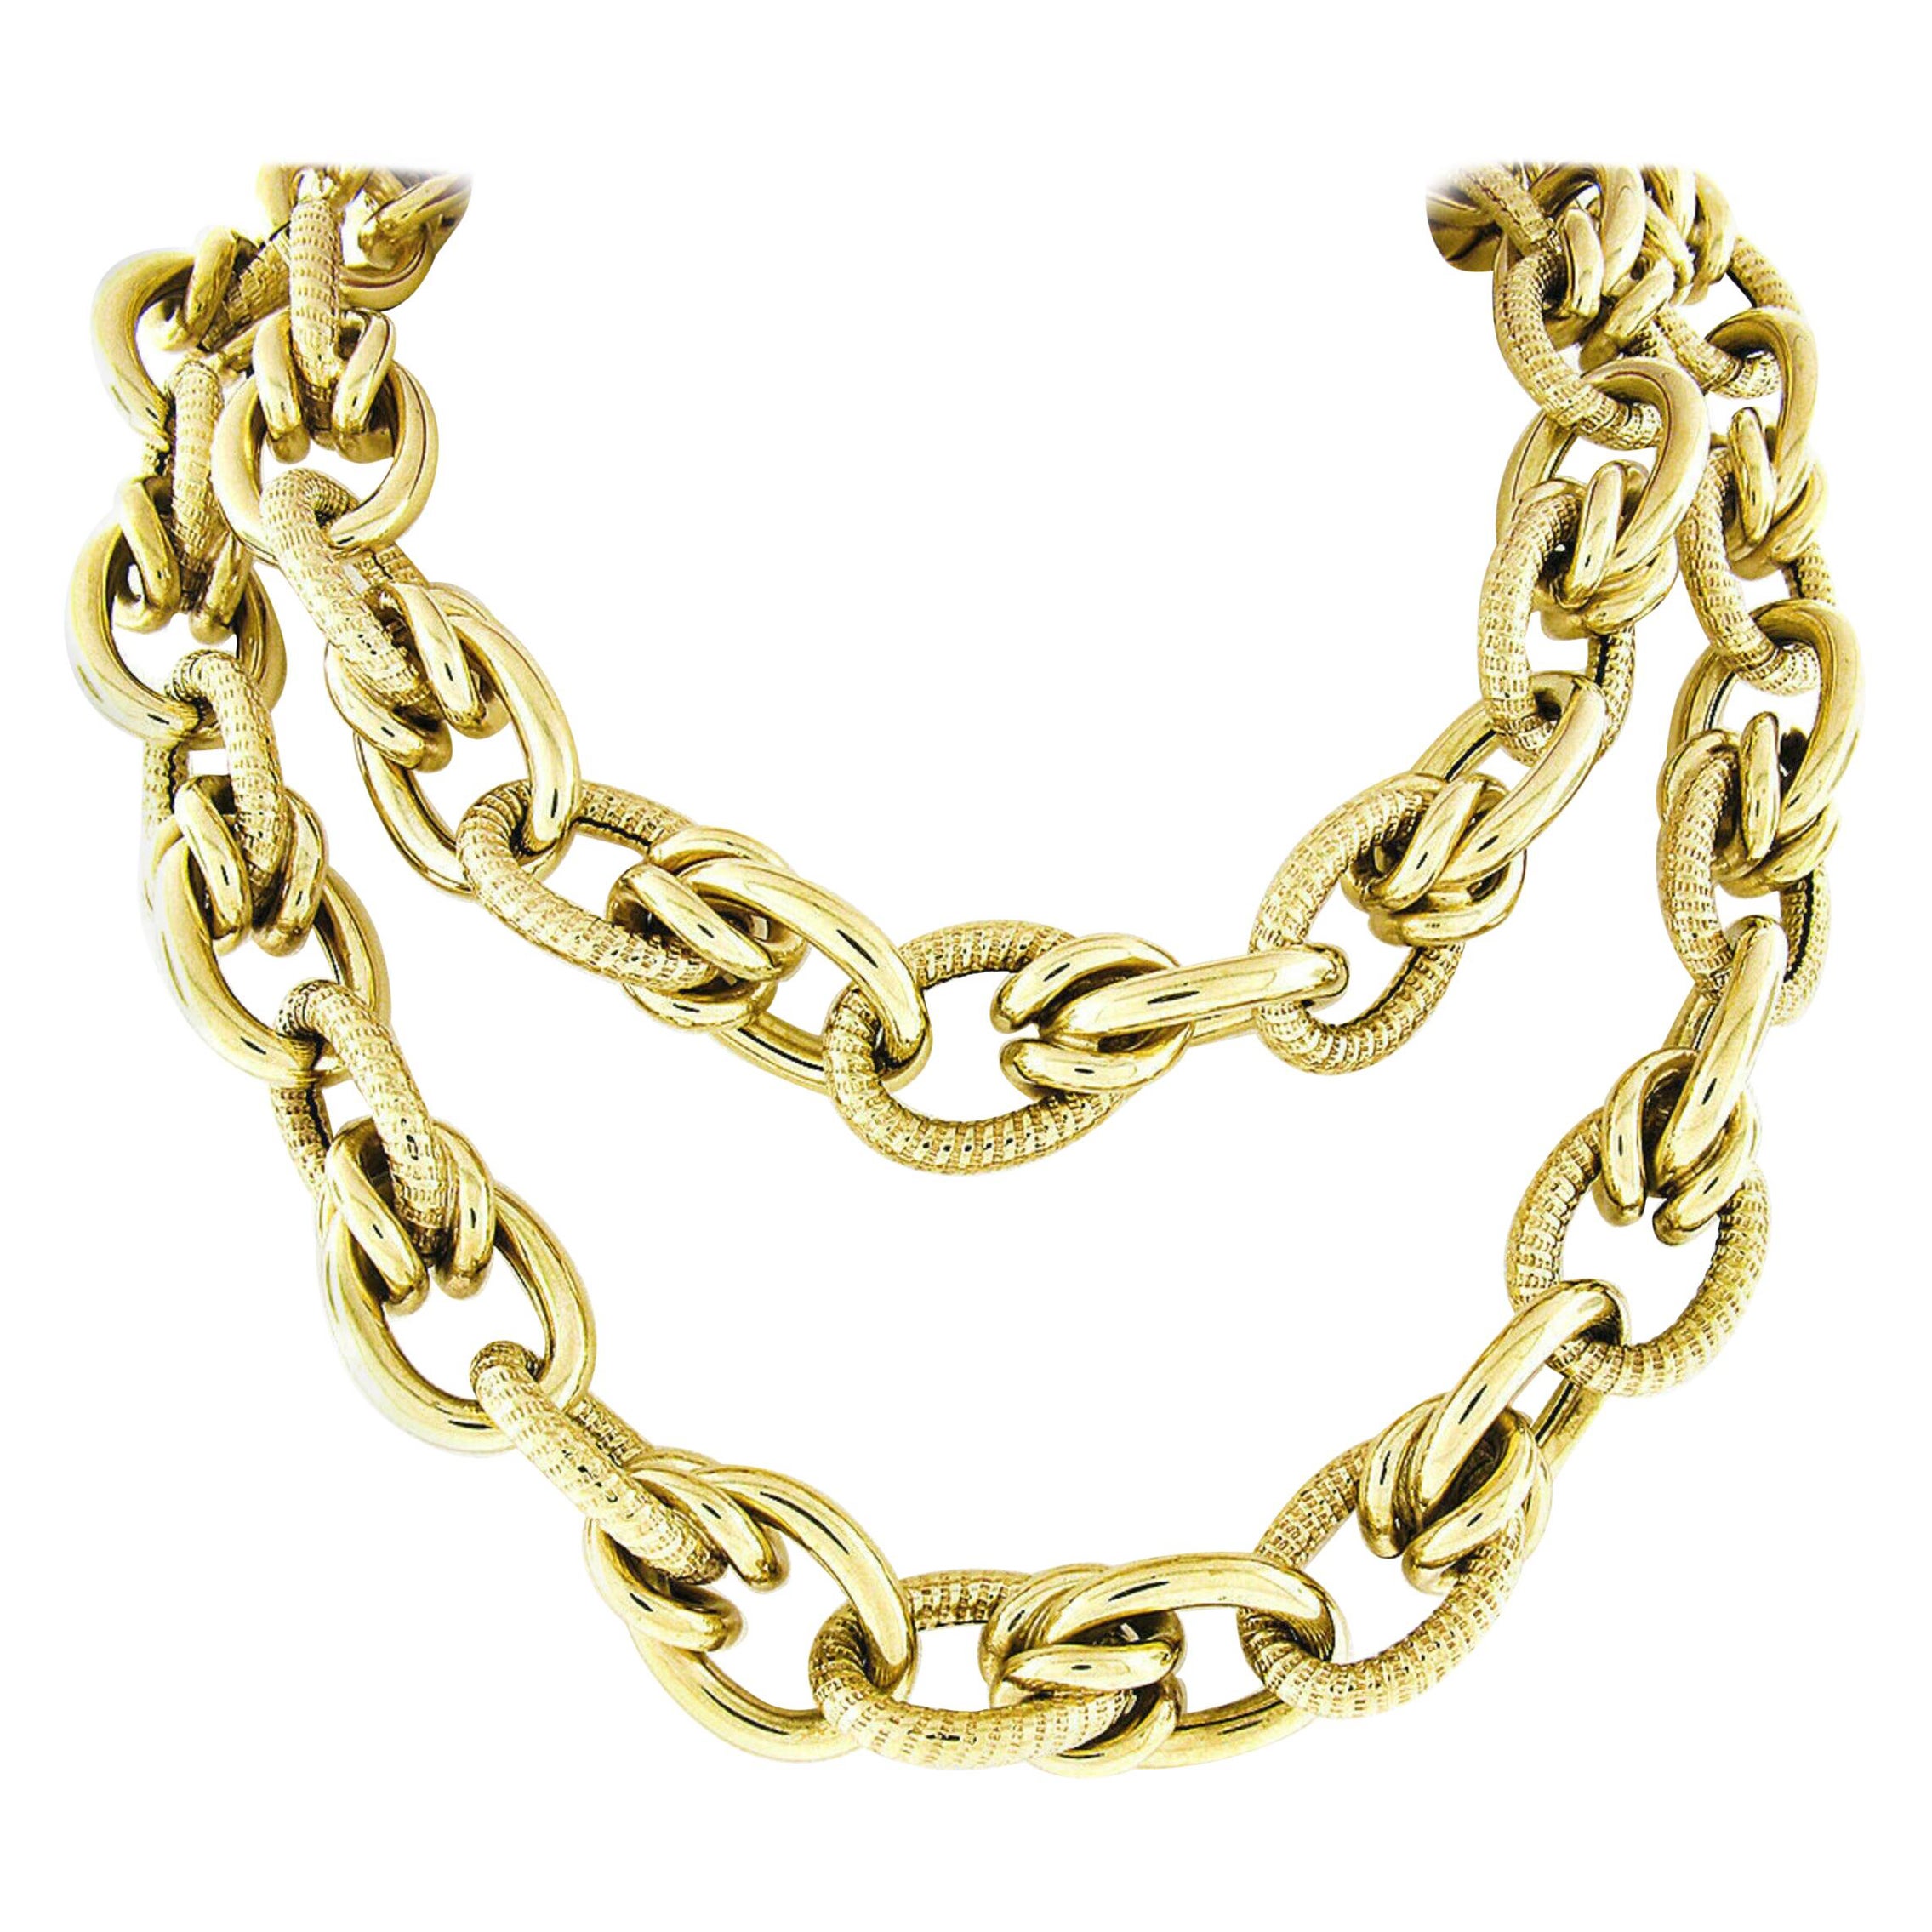 Long 14k Gold Polished Textured Oval Knotted Link Chain Statement Necklace